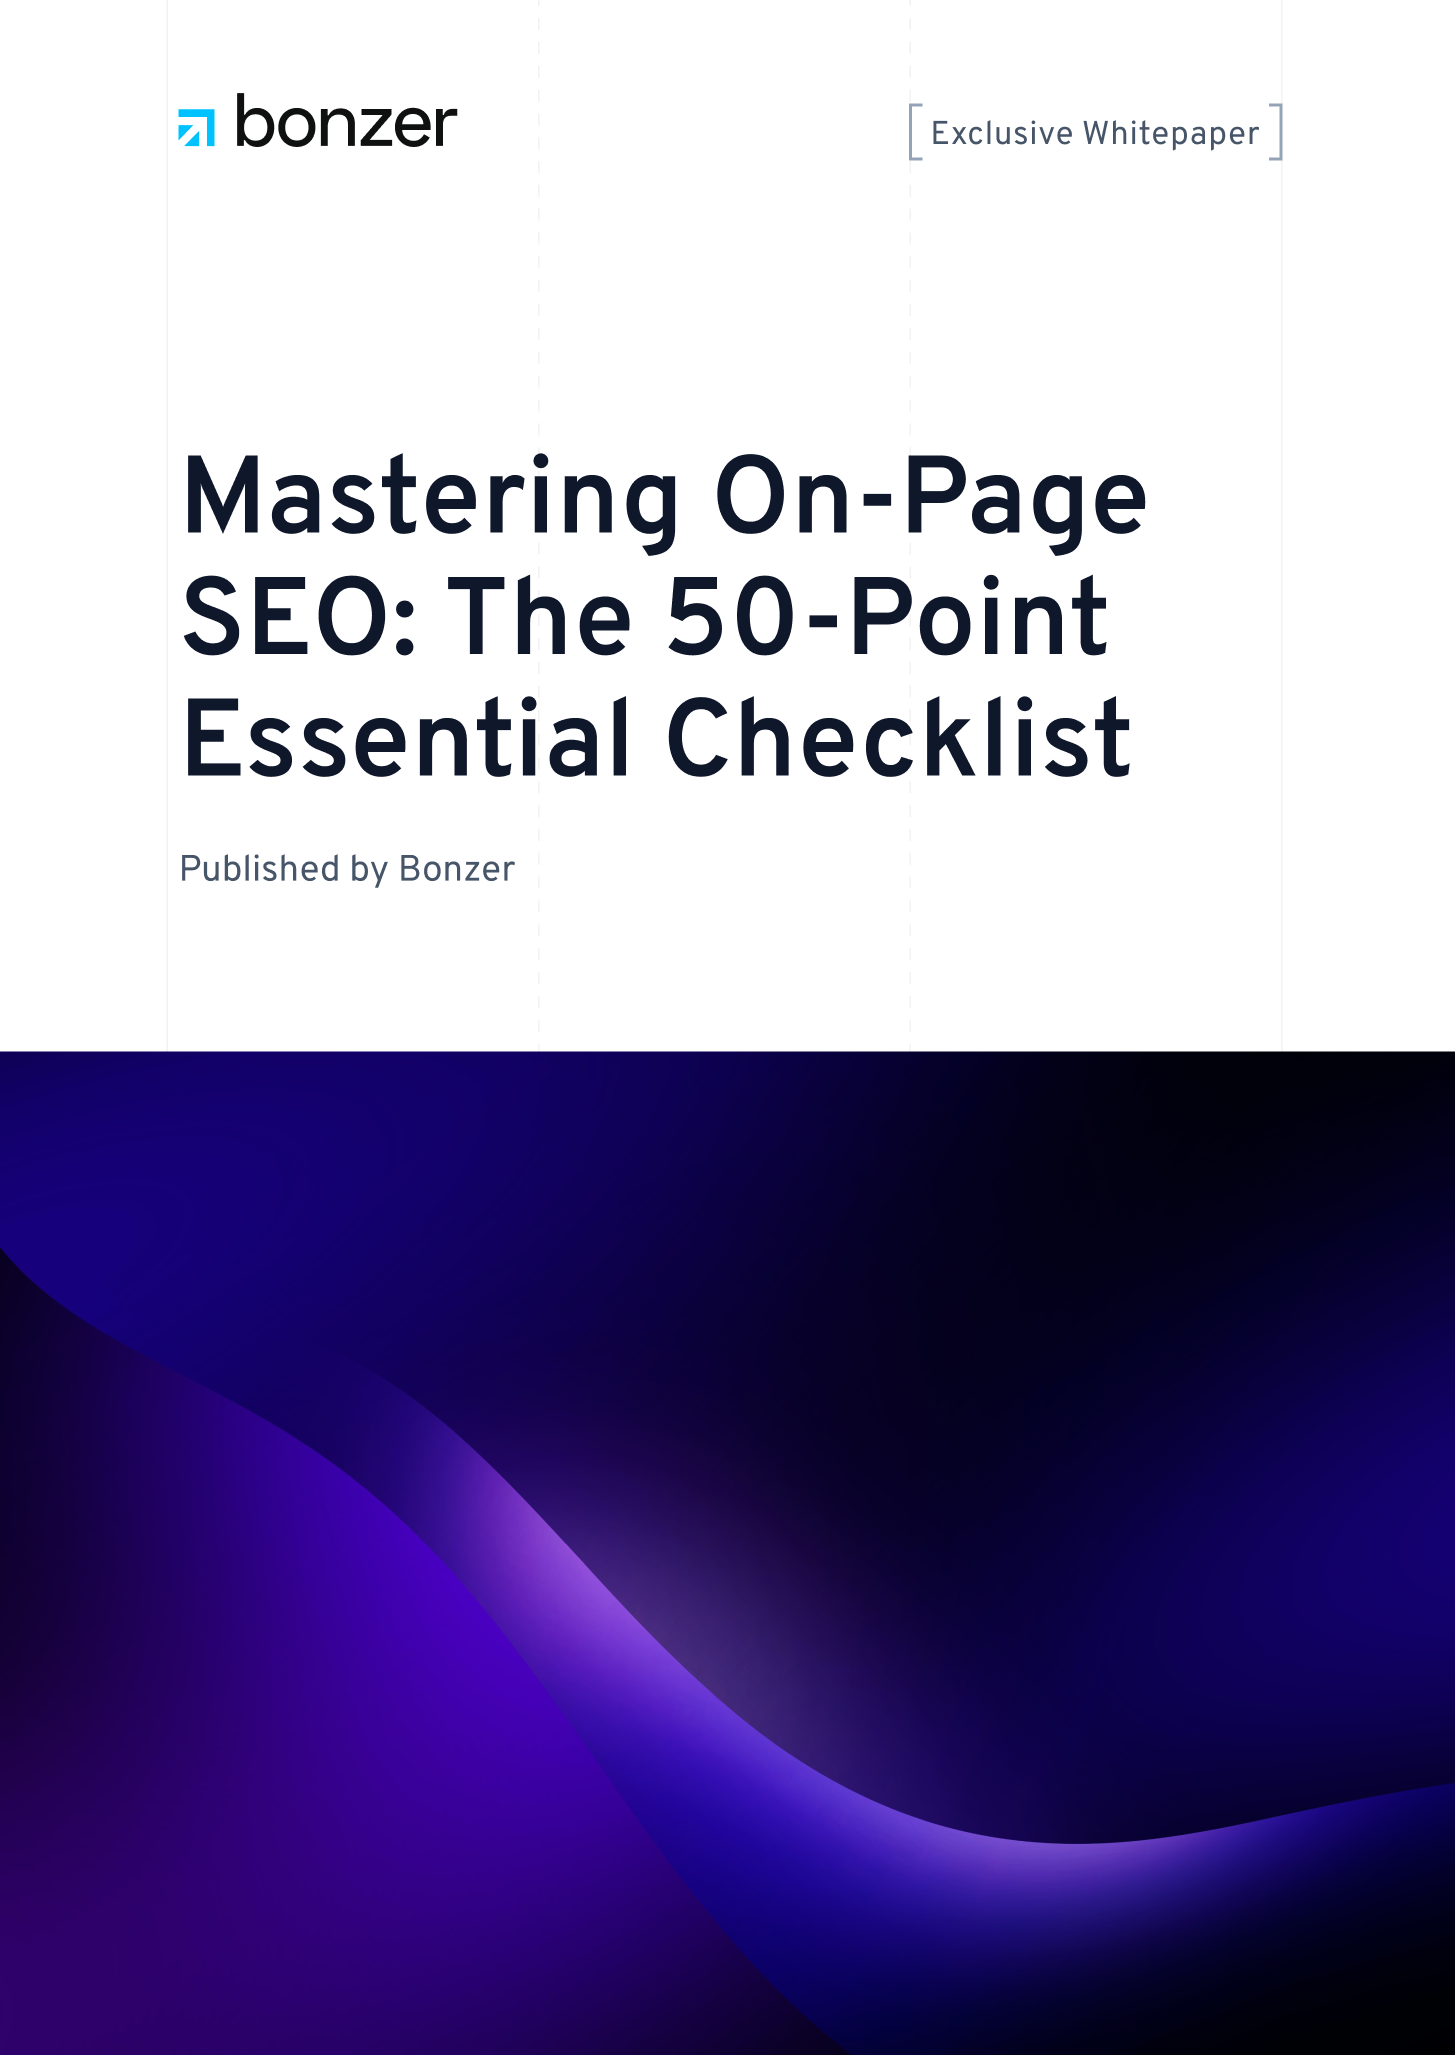 Mastering On-Page SEO: The 50-Point Essential Checklist